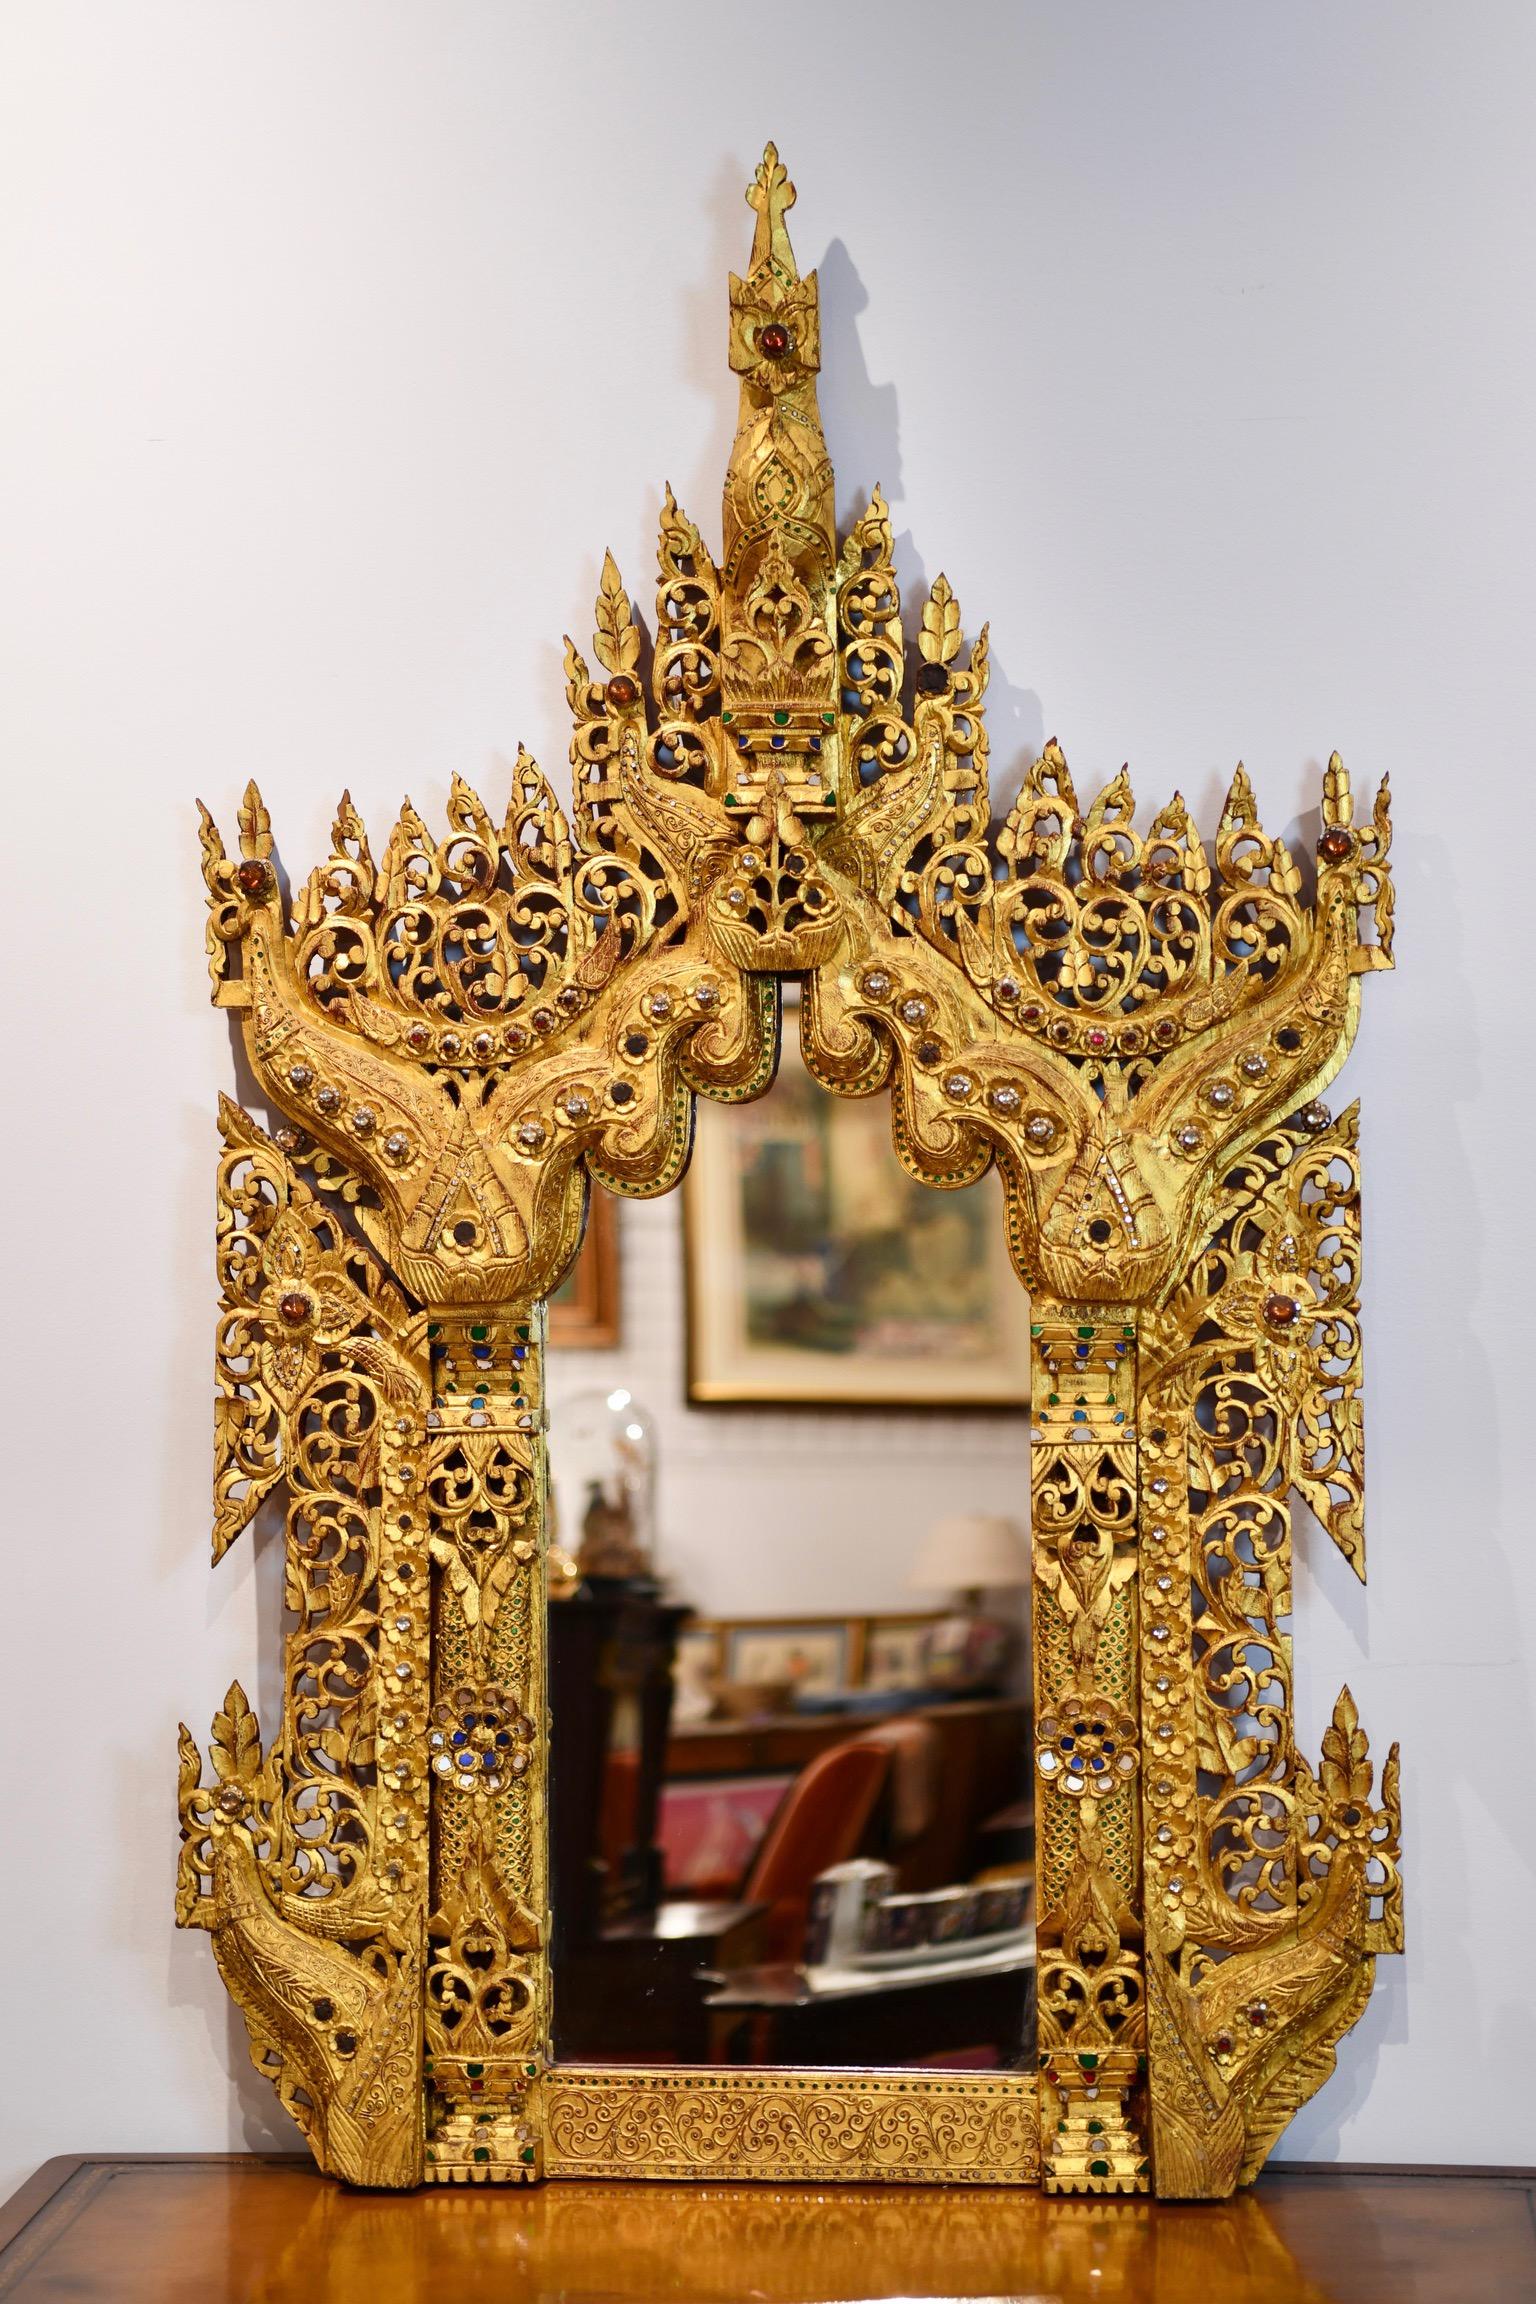 Ornate heavily carved and giltwood mirror. The wood is gilded throughout and adorned with colorful glass pieces. Some glass pieces are missing but overall very good condition, including mirror glass. Likely Thai or Burmese. Dimensions: 56